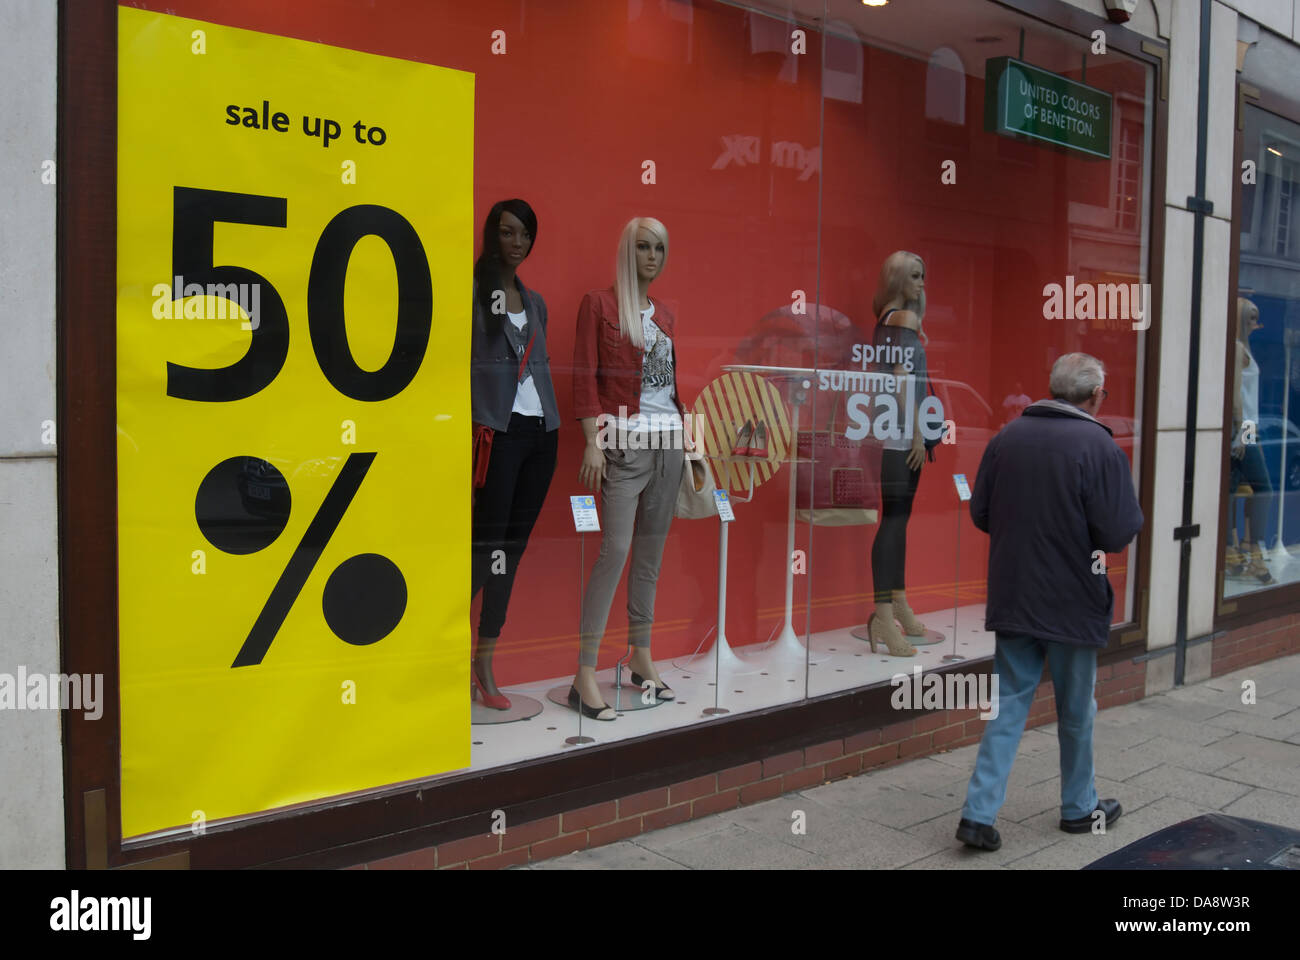 Uitmaken Maestro Integratie united colours of benetton shop window display advertising a sale with up  to 50% off, as man passes by Stock Photo - Alamy